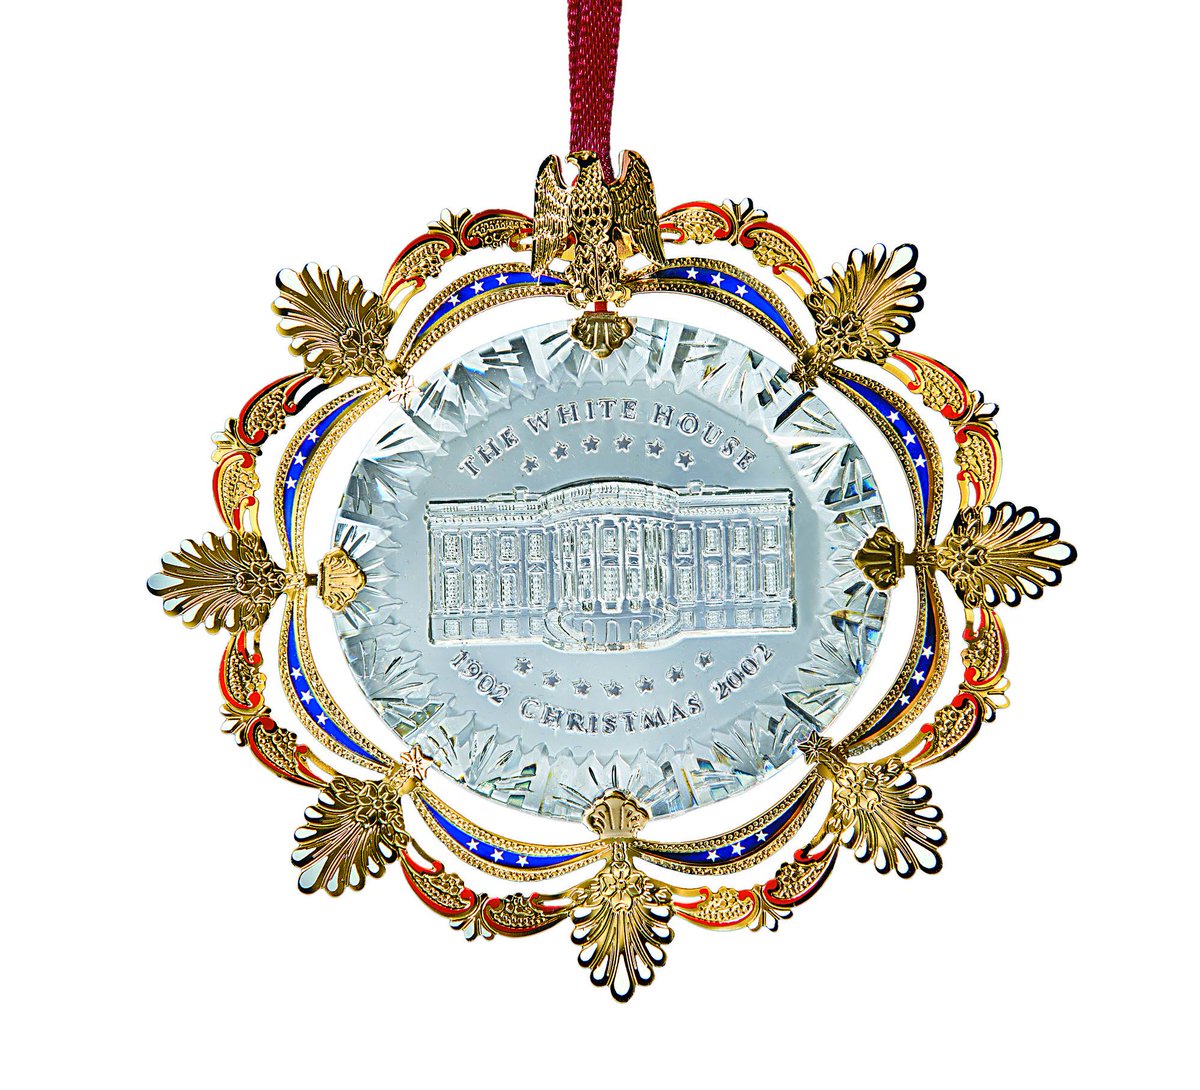 The 2002 ornament features a crystal-like acrylic core, inspired by the sparkling chandeliers of the 1902 East Room. The decorative frame has acanthus leaves and an eagle, elements of the East Room after the Roosevelt redecoration.Make your room sparkle:  https://shop.whitehousehistory.org/holidays/ornaments/the-2002-white-house-christmas-ornament-east-room-motifs-celebrating-the-centennial-of-the-1902-redecoration